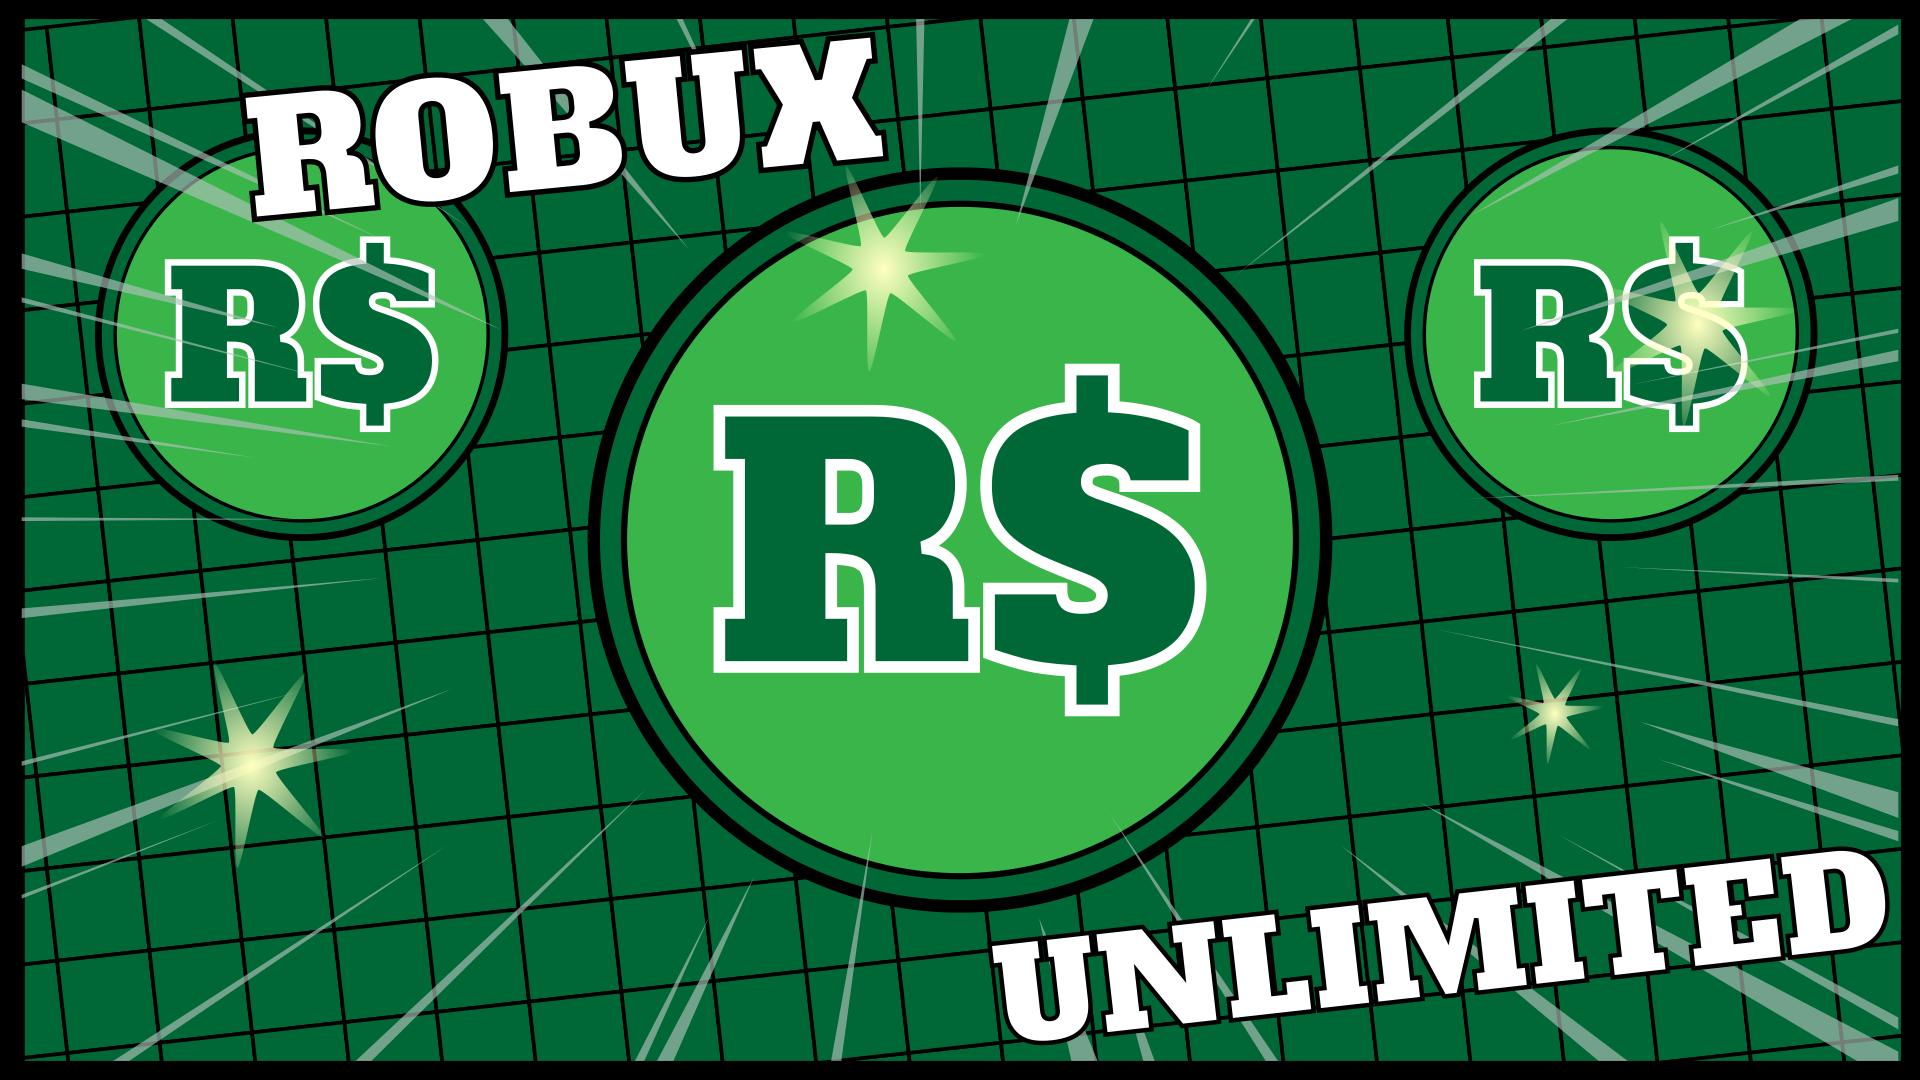 Free Robux Pro Guide Best Tix Booster 2019 For Android Apk Download - robuxyboostga